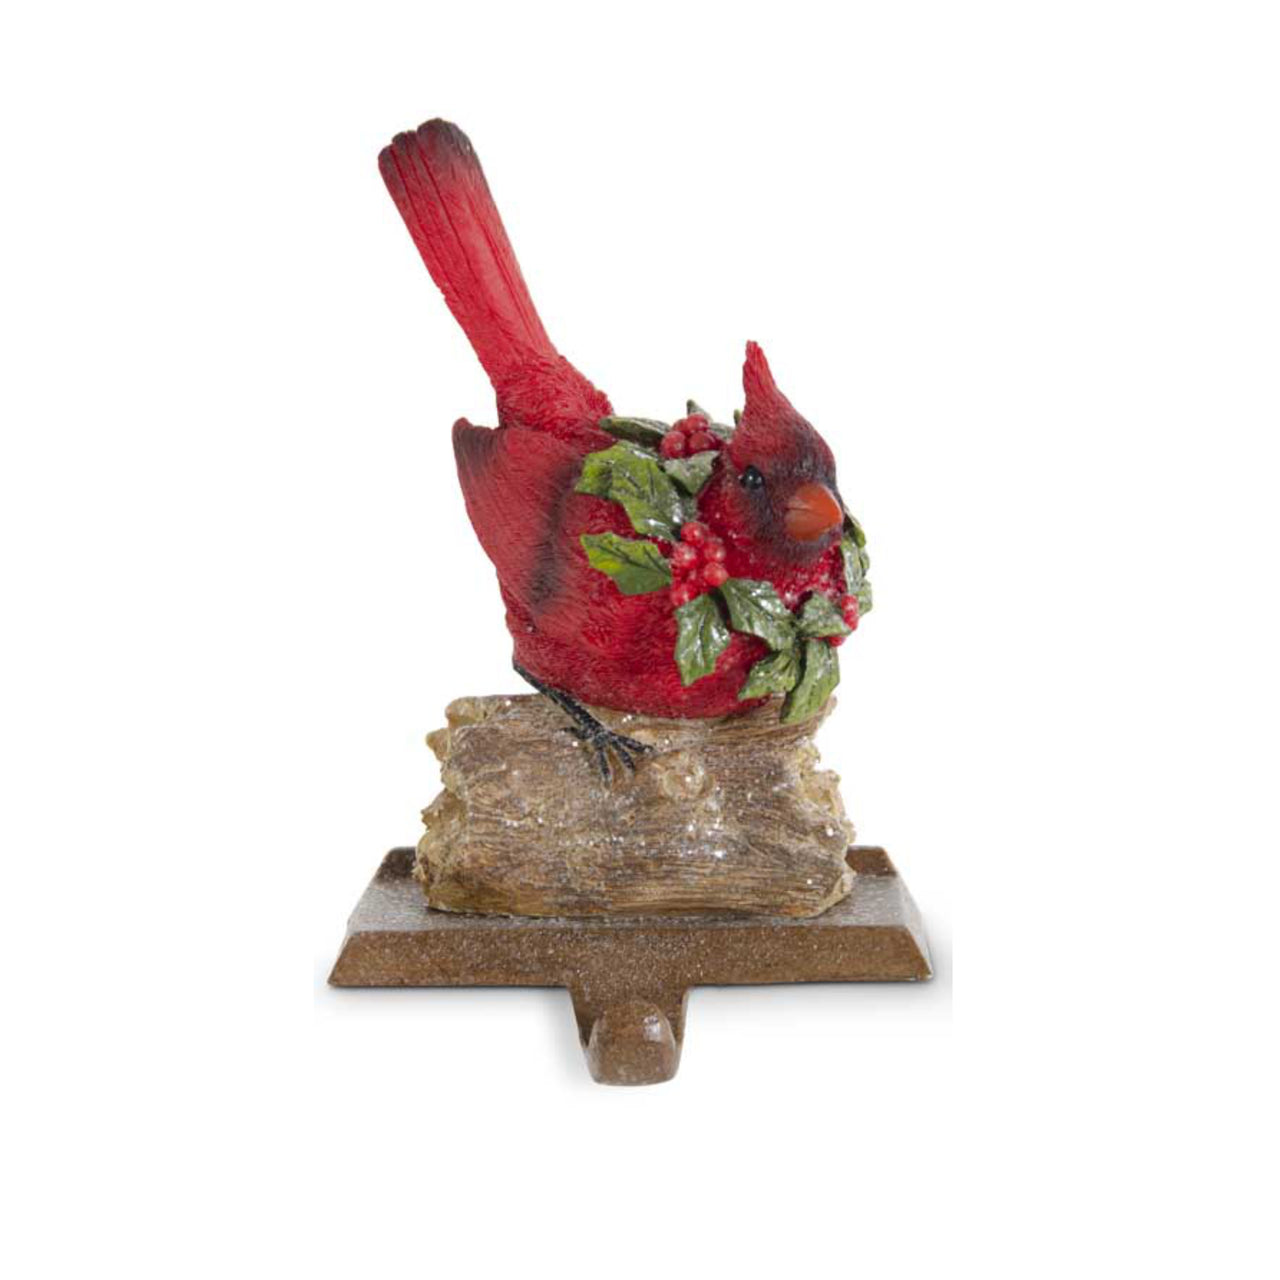 Glittered Resin Cardinals w/Holly Wreaths Stocking Holders  K&K Tail Up  